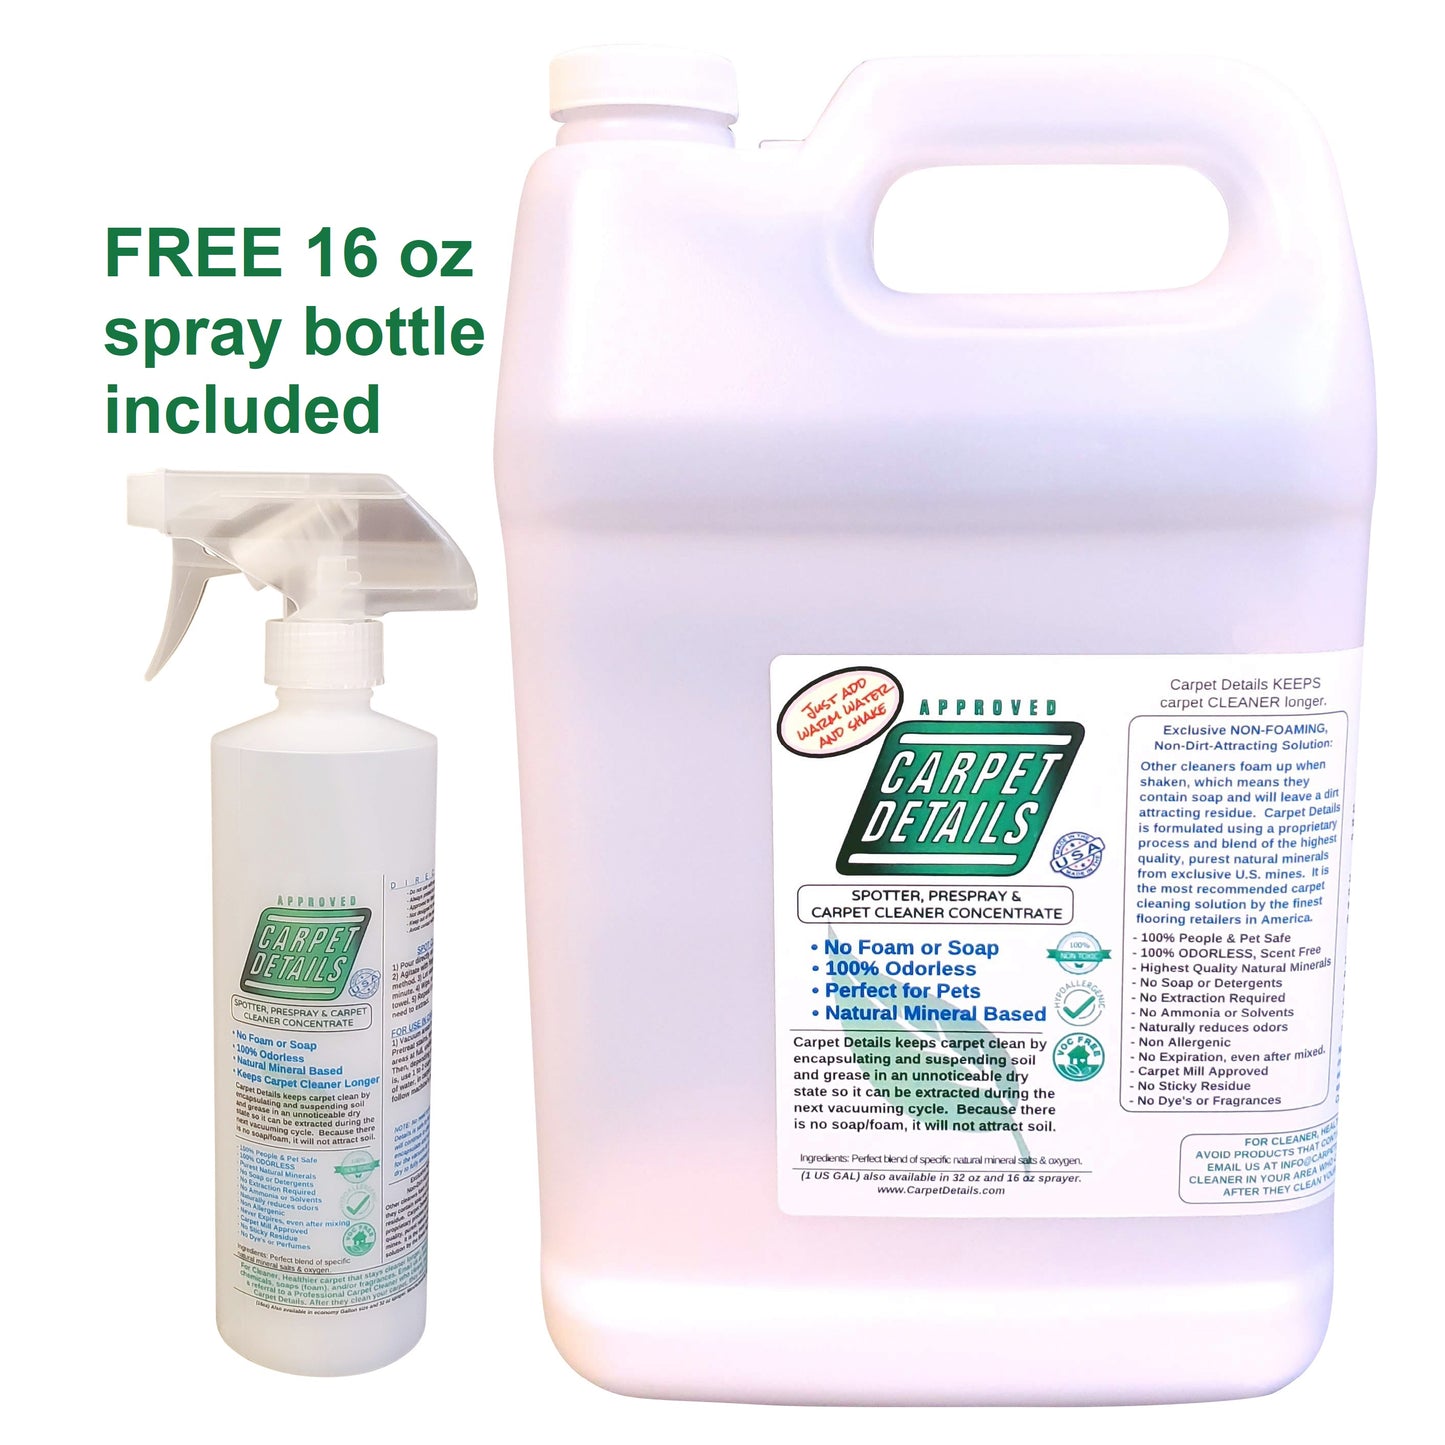 For Home Users Carpet Details Pet Stain and Odor Eliminator Spotter and Cleaner formulated for Home Carpet Cleaning Machines, with free 16 oz sprayer